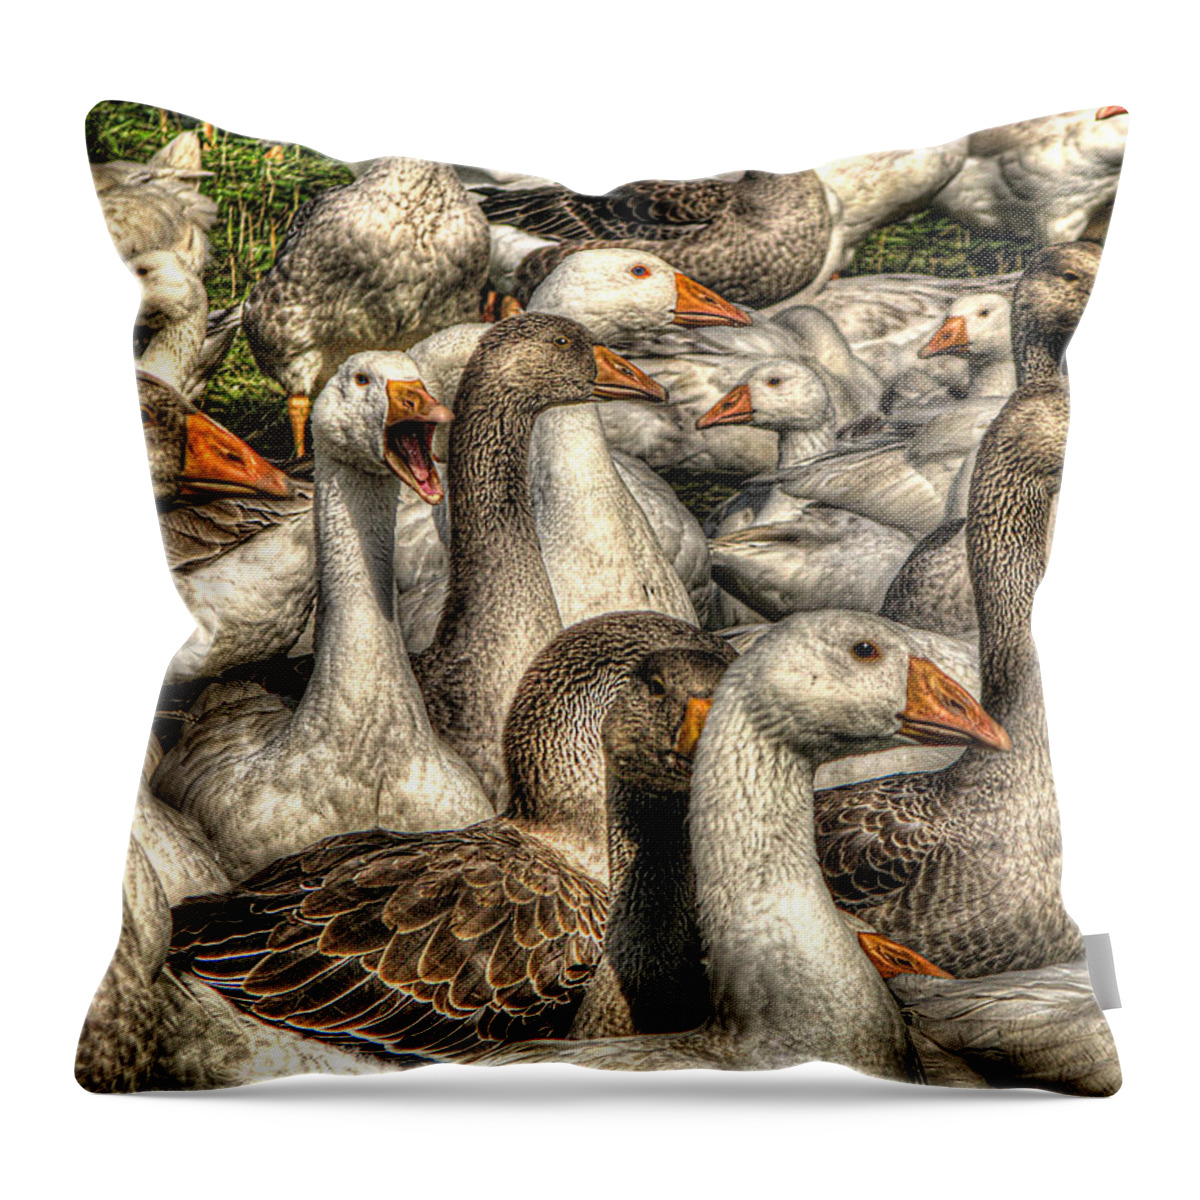 Geese Throw Pillow featuring the photograph In My Humble Opinion by William Fields